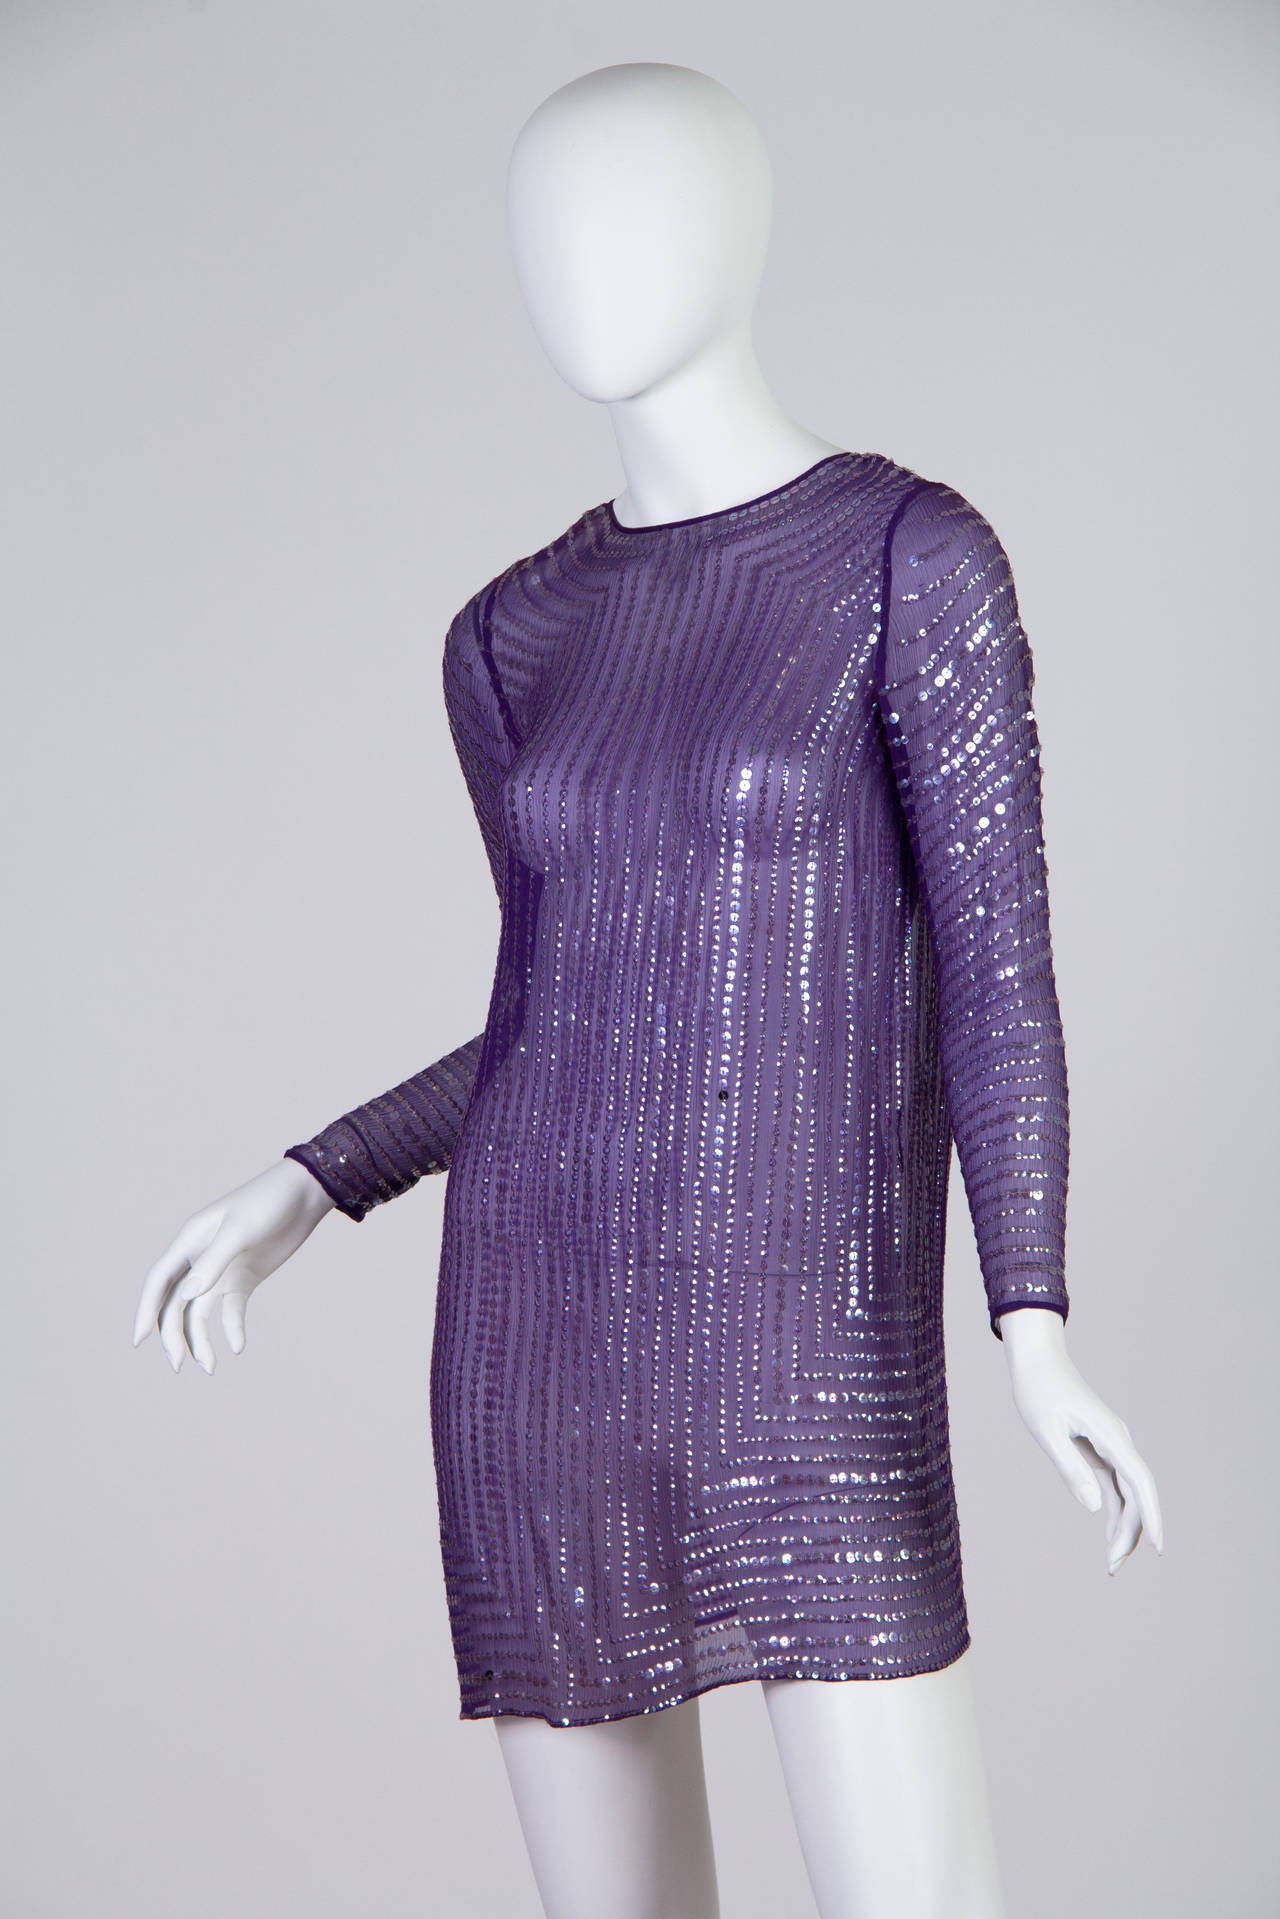 This sheer purple tunic dress by Halston is embroidered all over by hand with sequins. The straight cut of the torso and the architectural lines of sequins echo the aesthetics of the Jazz Age, when short and glittering gowns were favoured by